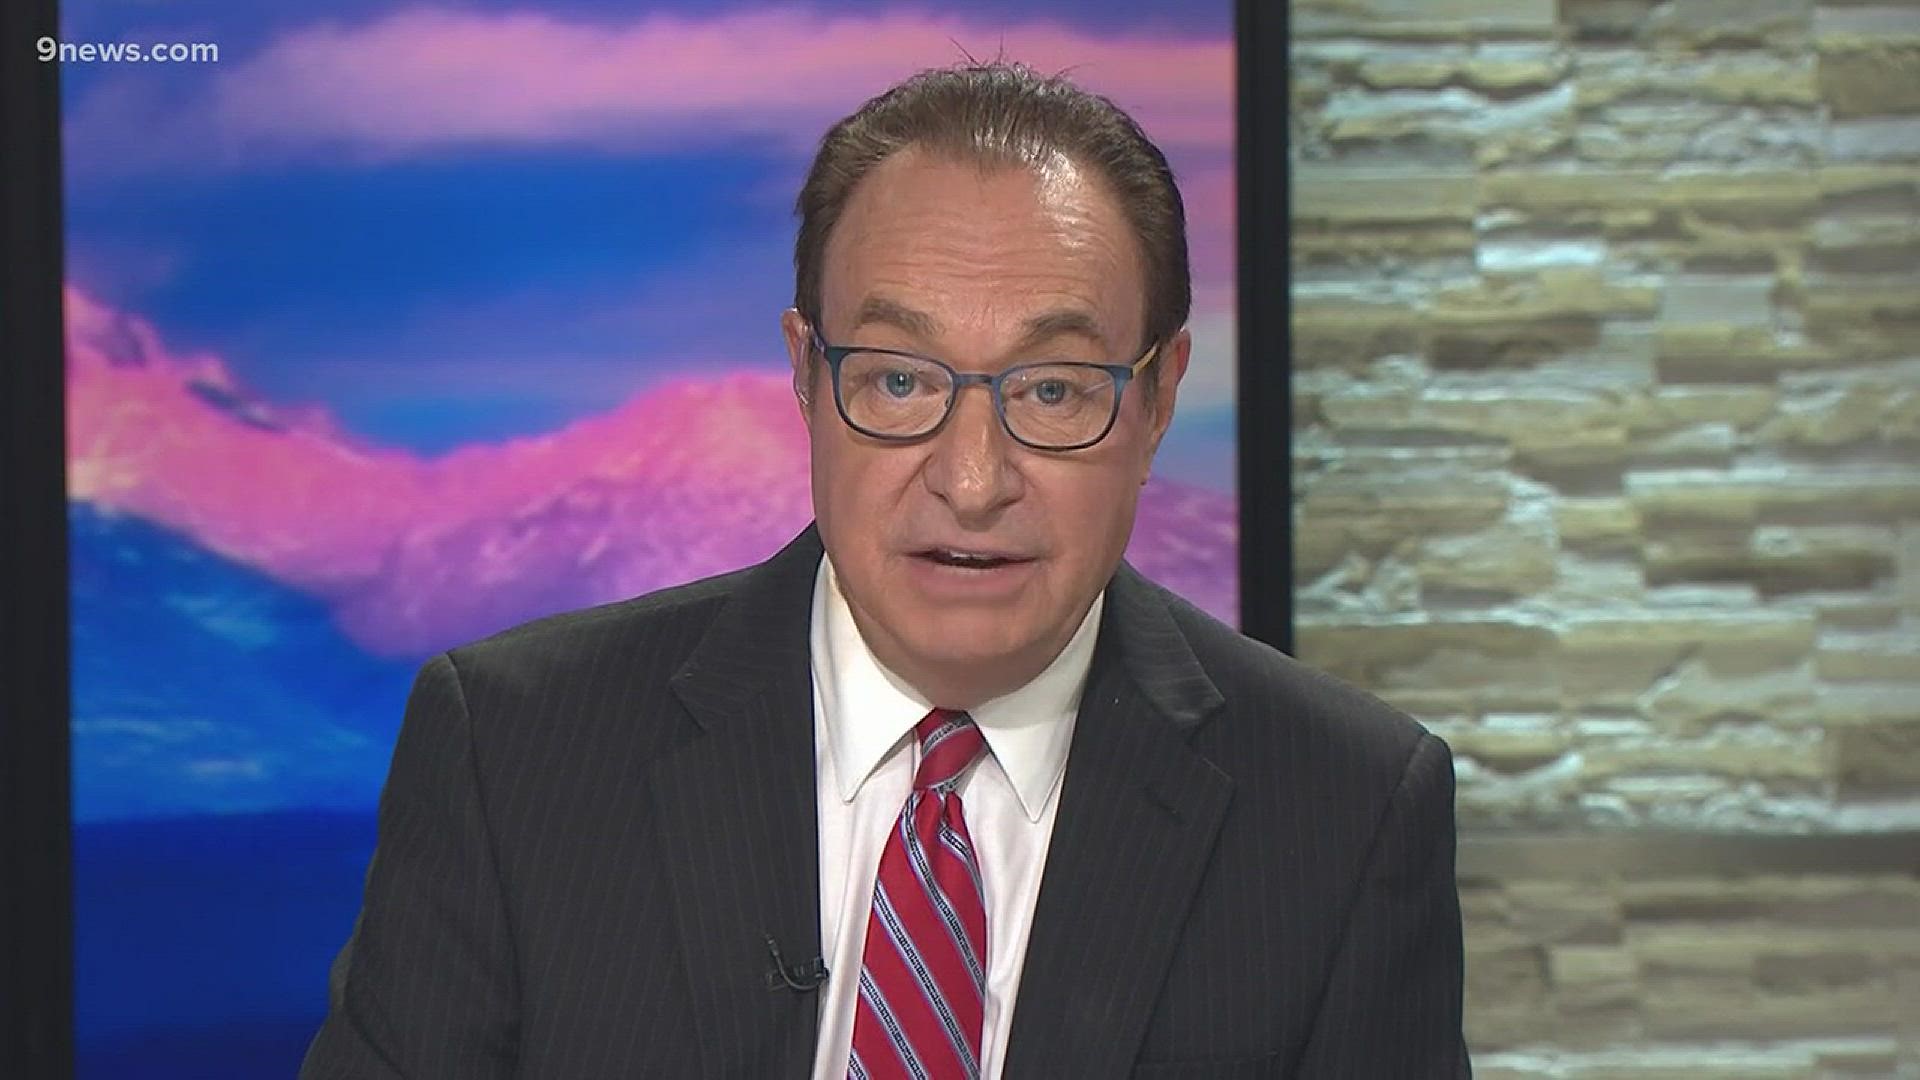 Henry Roman, from the Denver Classroom Teachers Association, joined the 9NEWS morning show on Thursday, Jan. 17, 2019 to discuss negotiations with Denver Public Schools.